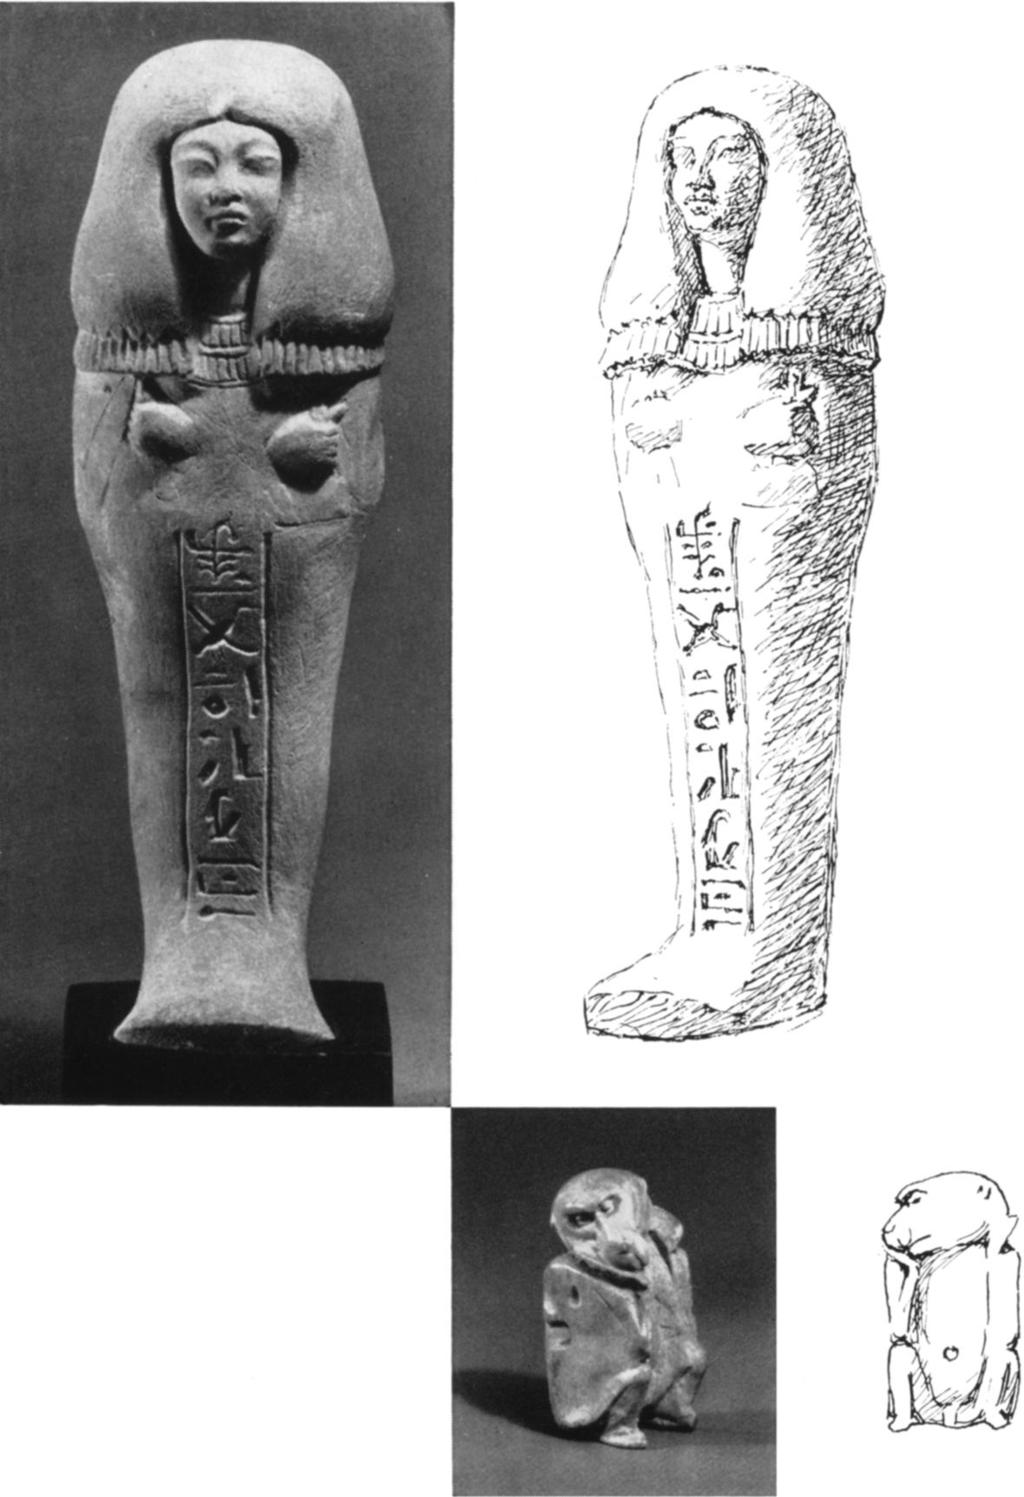 Bc Limestone, height 88 inches 669938 An exceptional example of this type of figurine in the suave style of the Amarna Period I i 0 ) 13 Astragalus in the form of a monkey